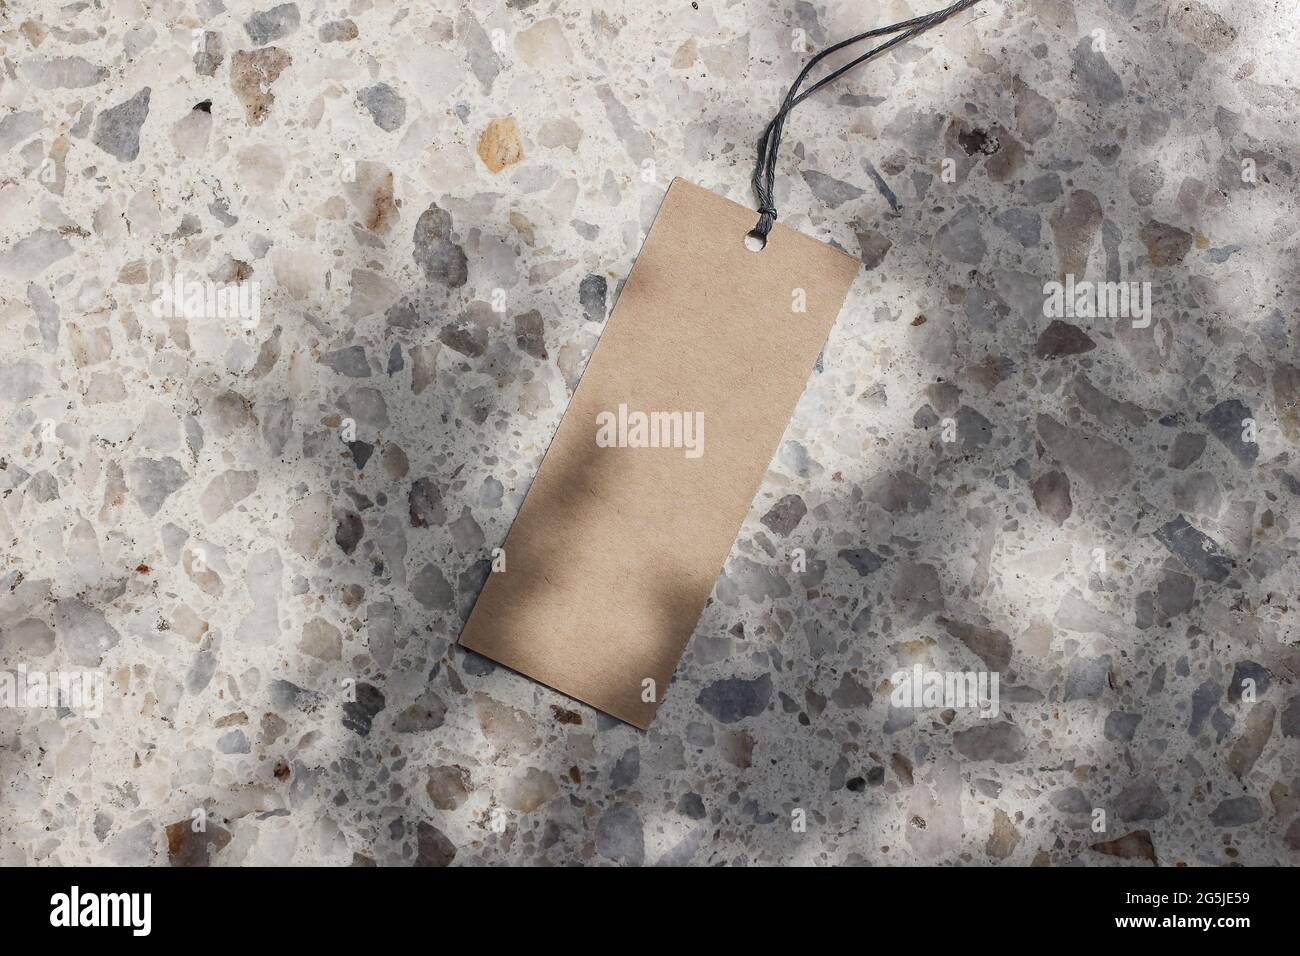 Blank craft paper gift tag, price label isolated in sunlight. Terrazzo background. Marble stone texture. Tree shadows overlay. Modern template Stock Photo